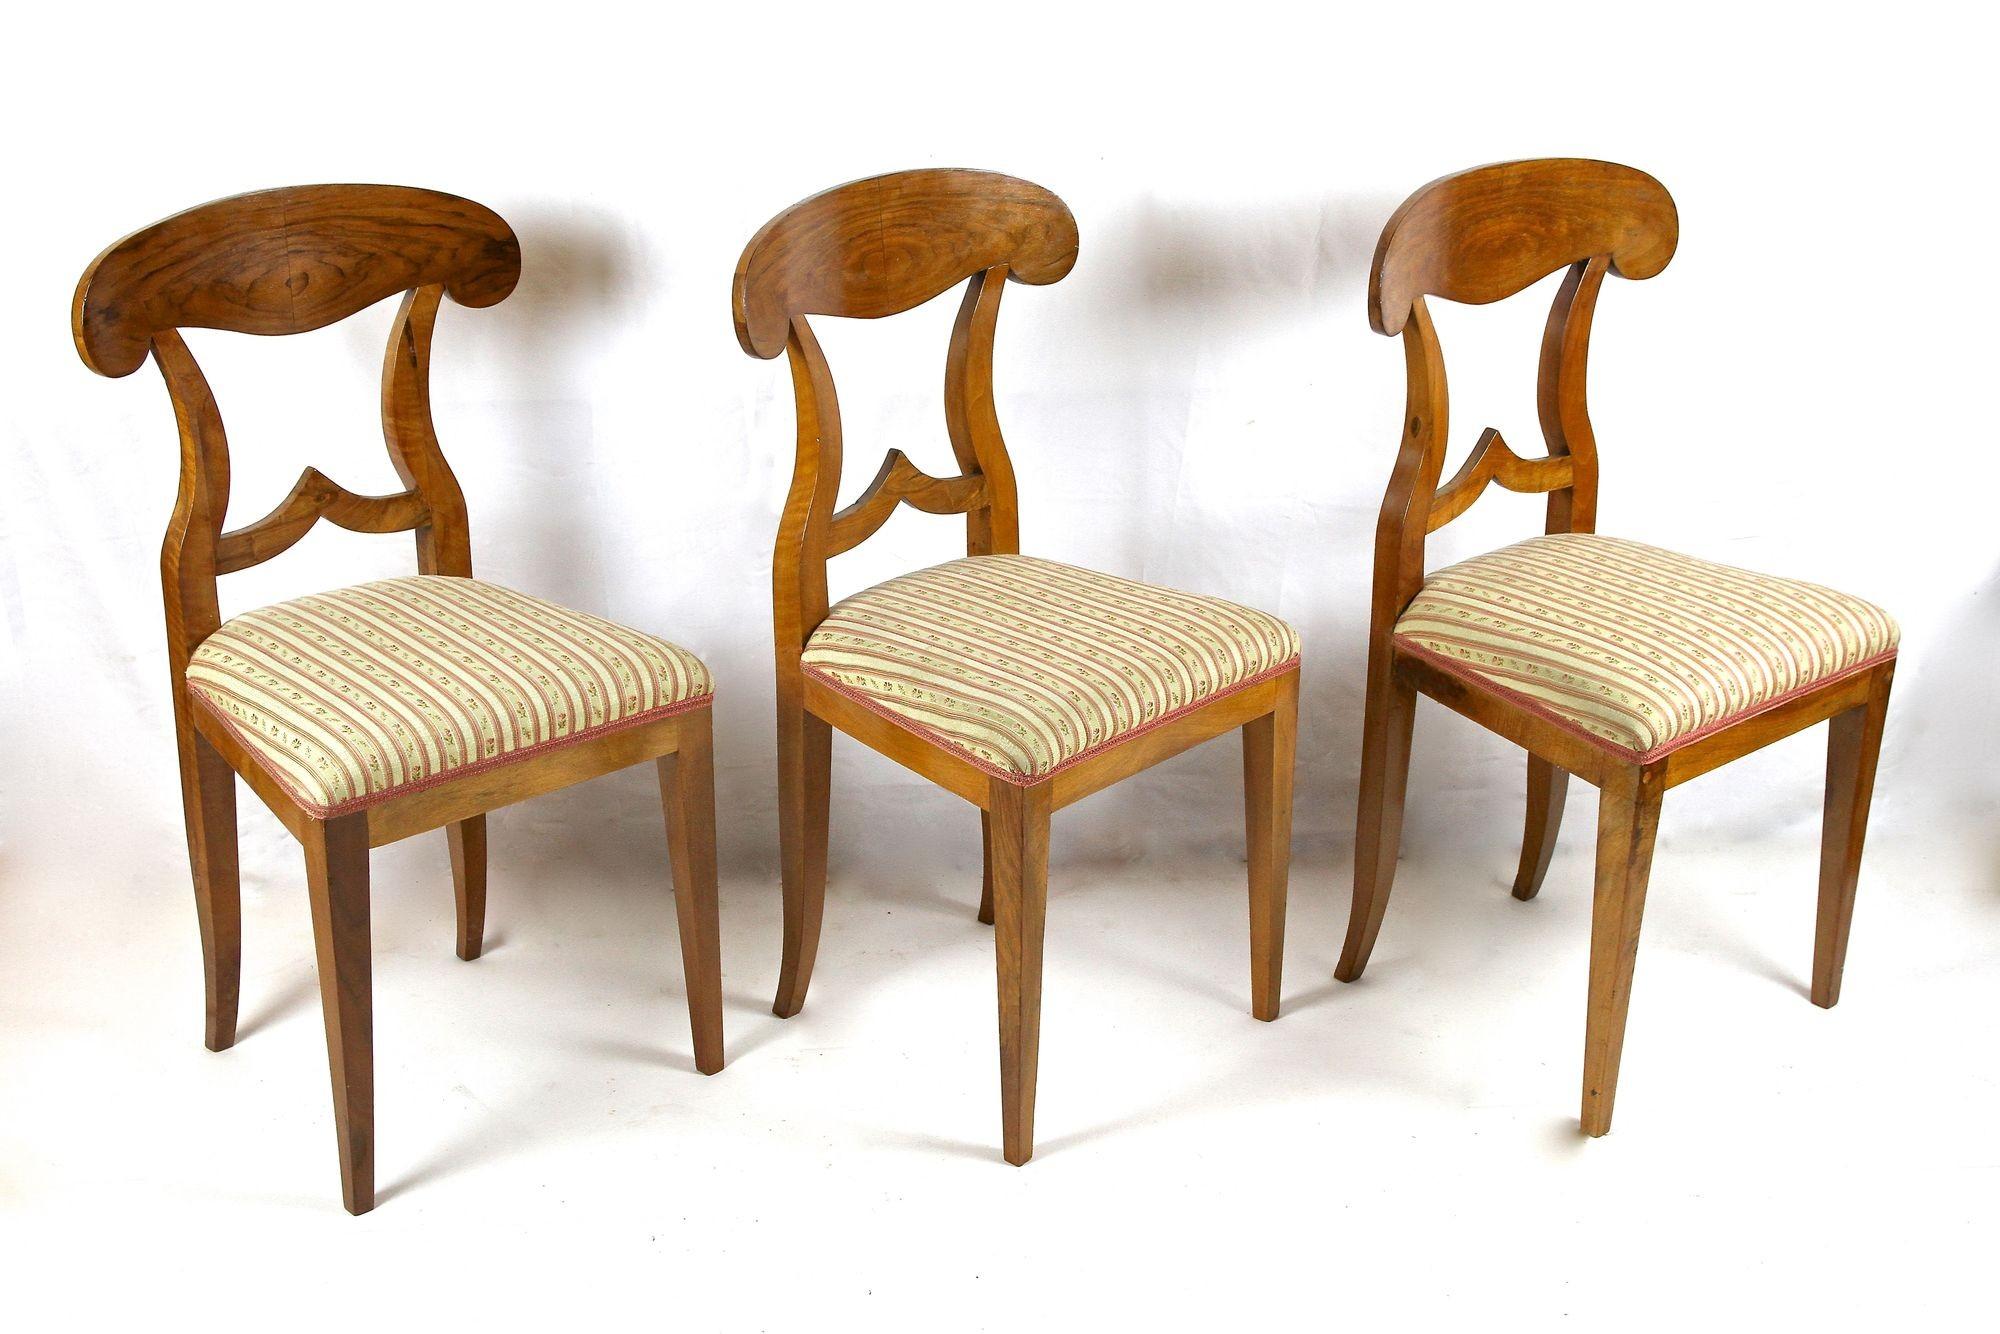 Set Of 6 Biedermeier Nutwood Shovel Dining Chairs, 19th Century, AT ca. 1830 For Sale 3